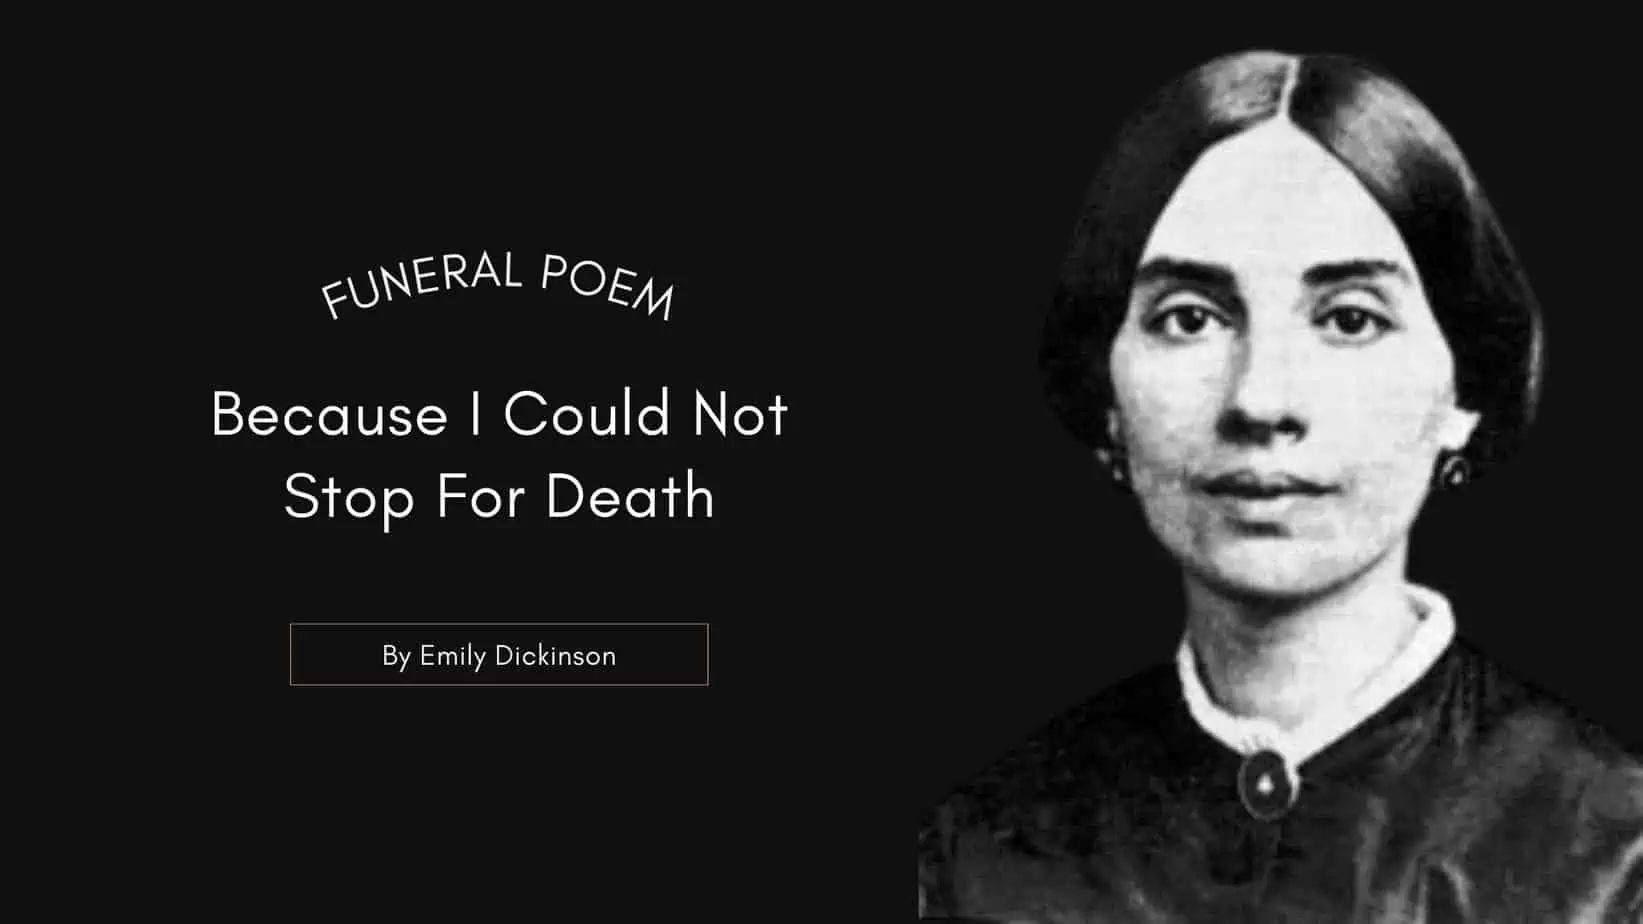 Emily Dickenson - Funeral Poem "Because I Could Not Stop For Death